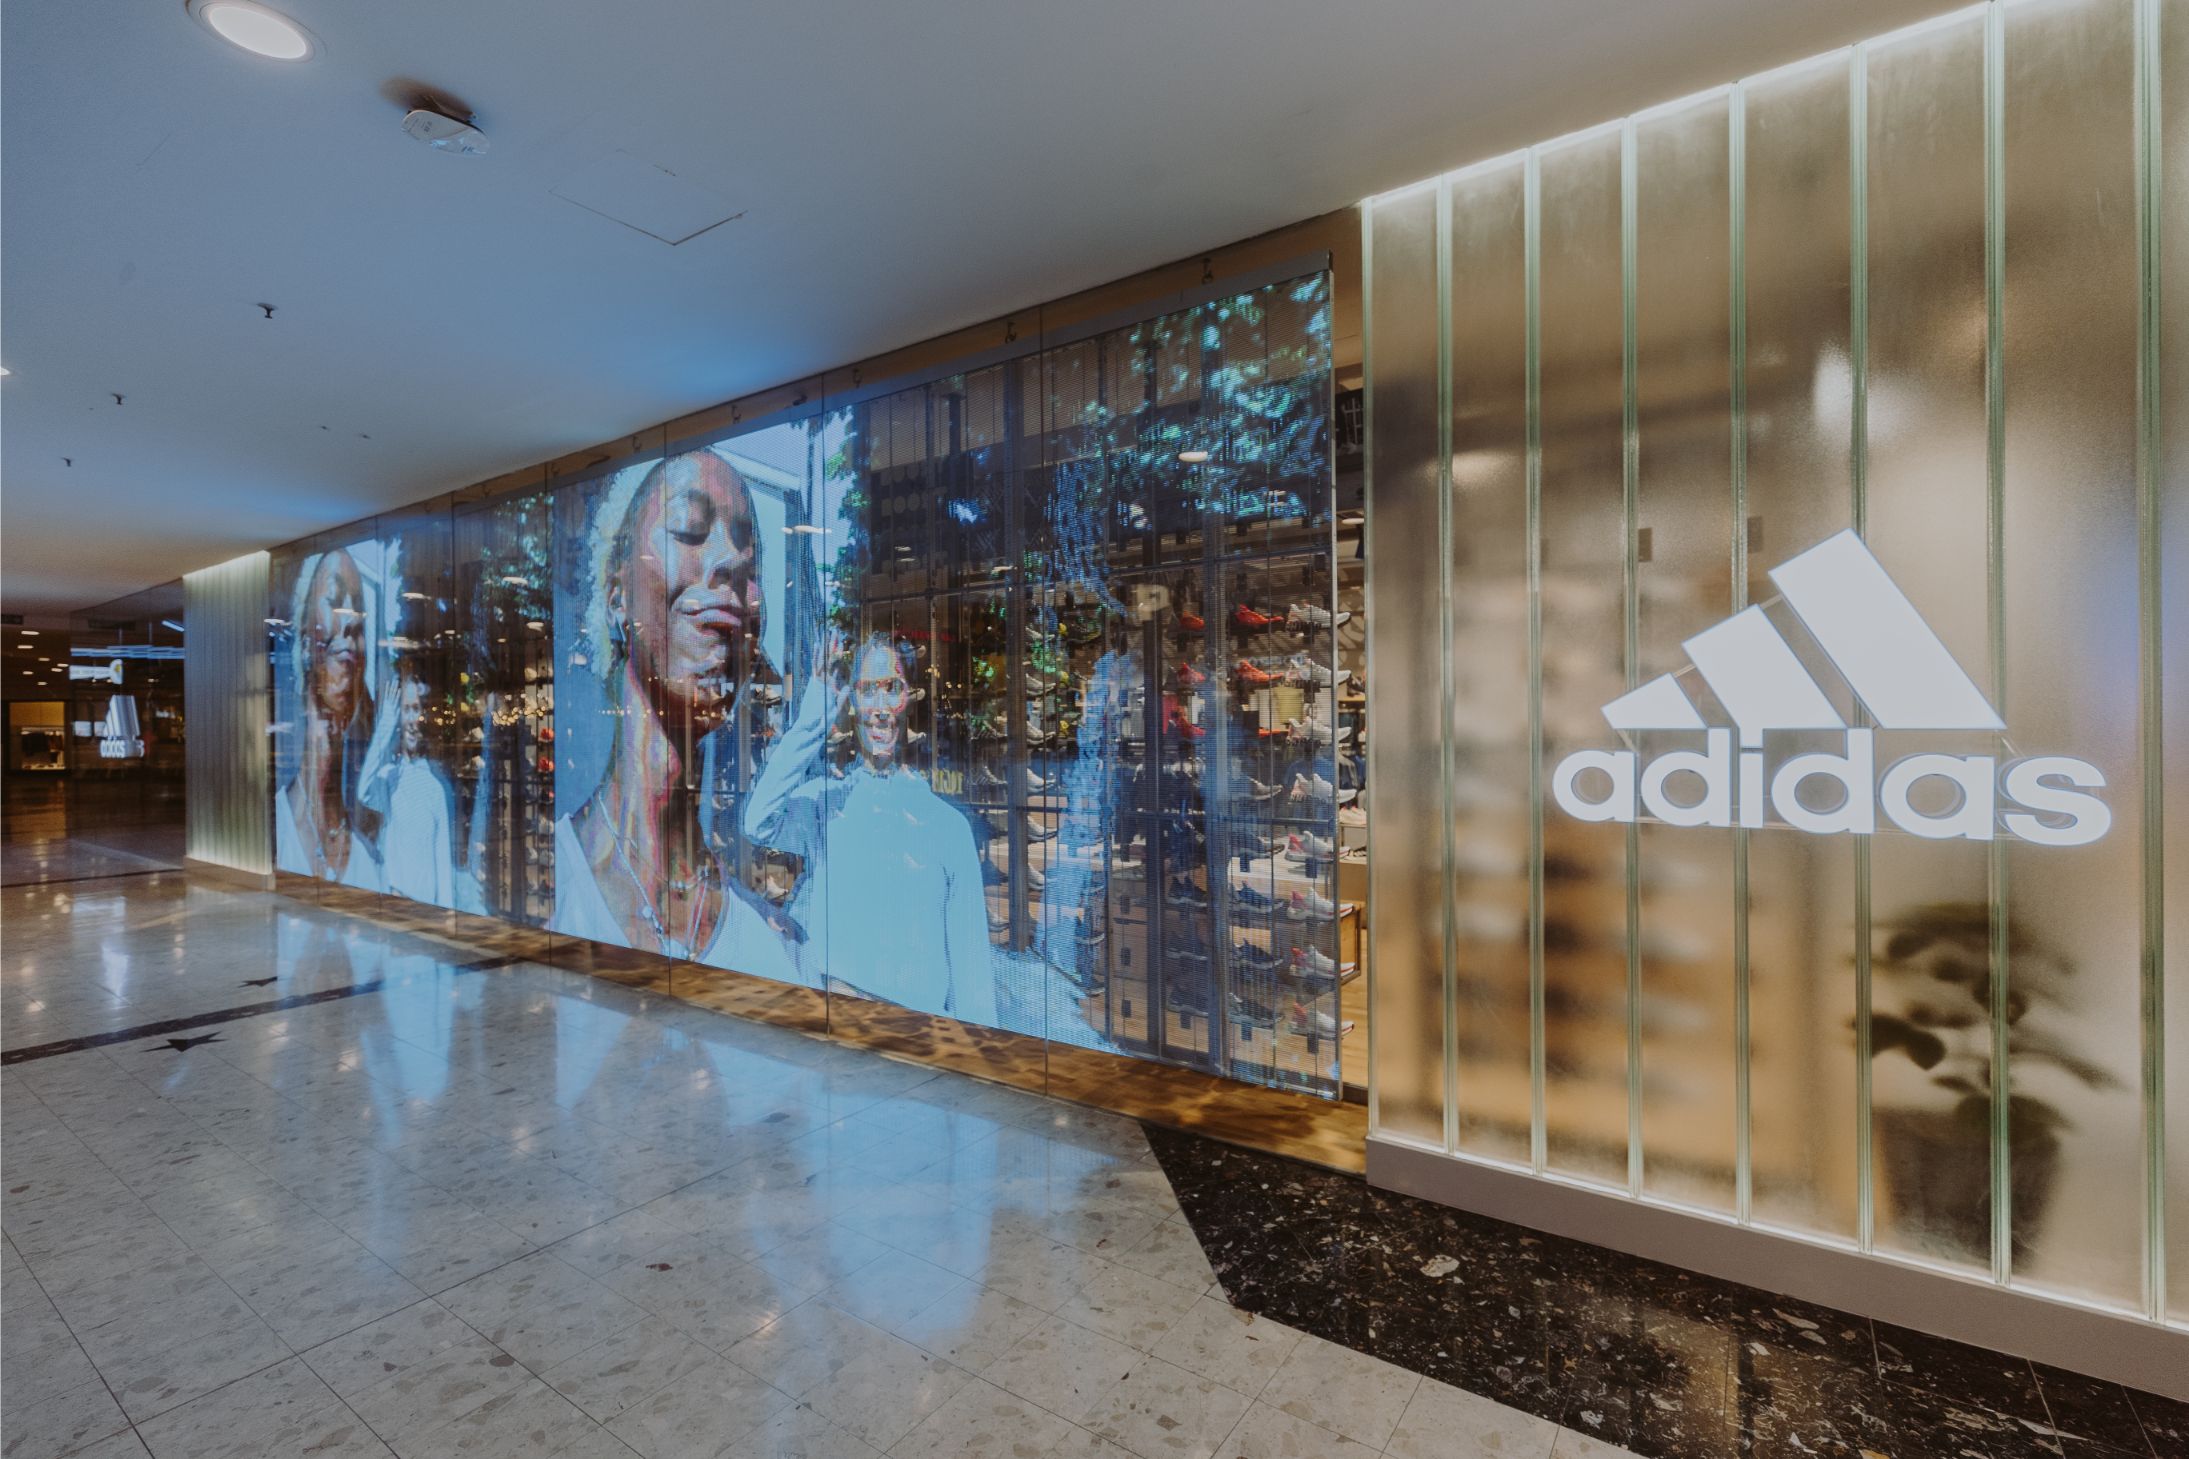 adidas Has Just Their Largest Flagship Store In Malaysia - MASSES